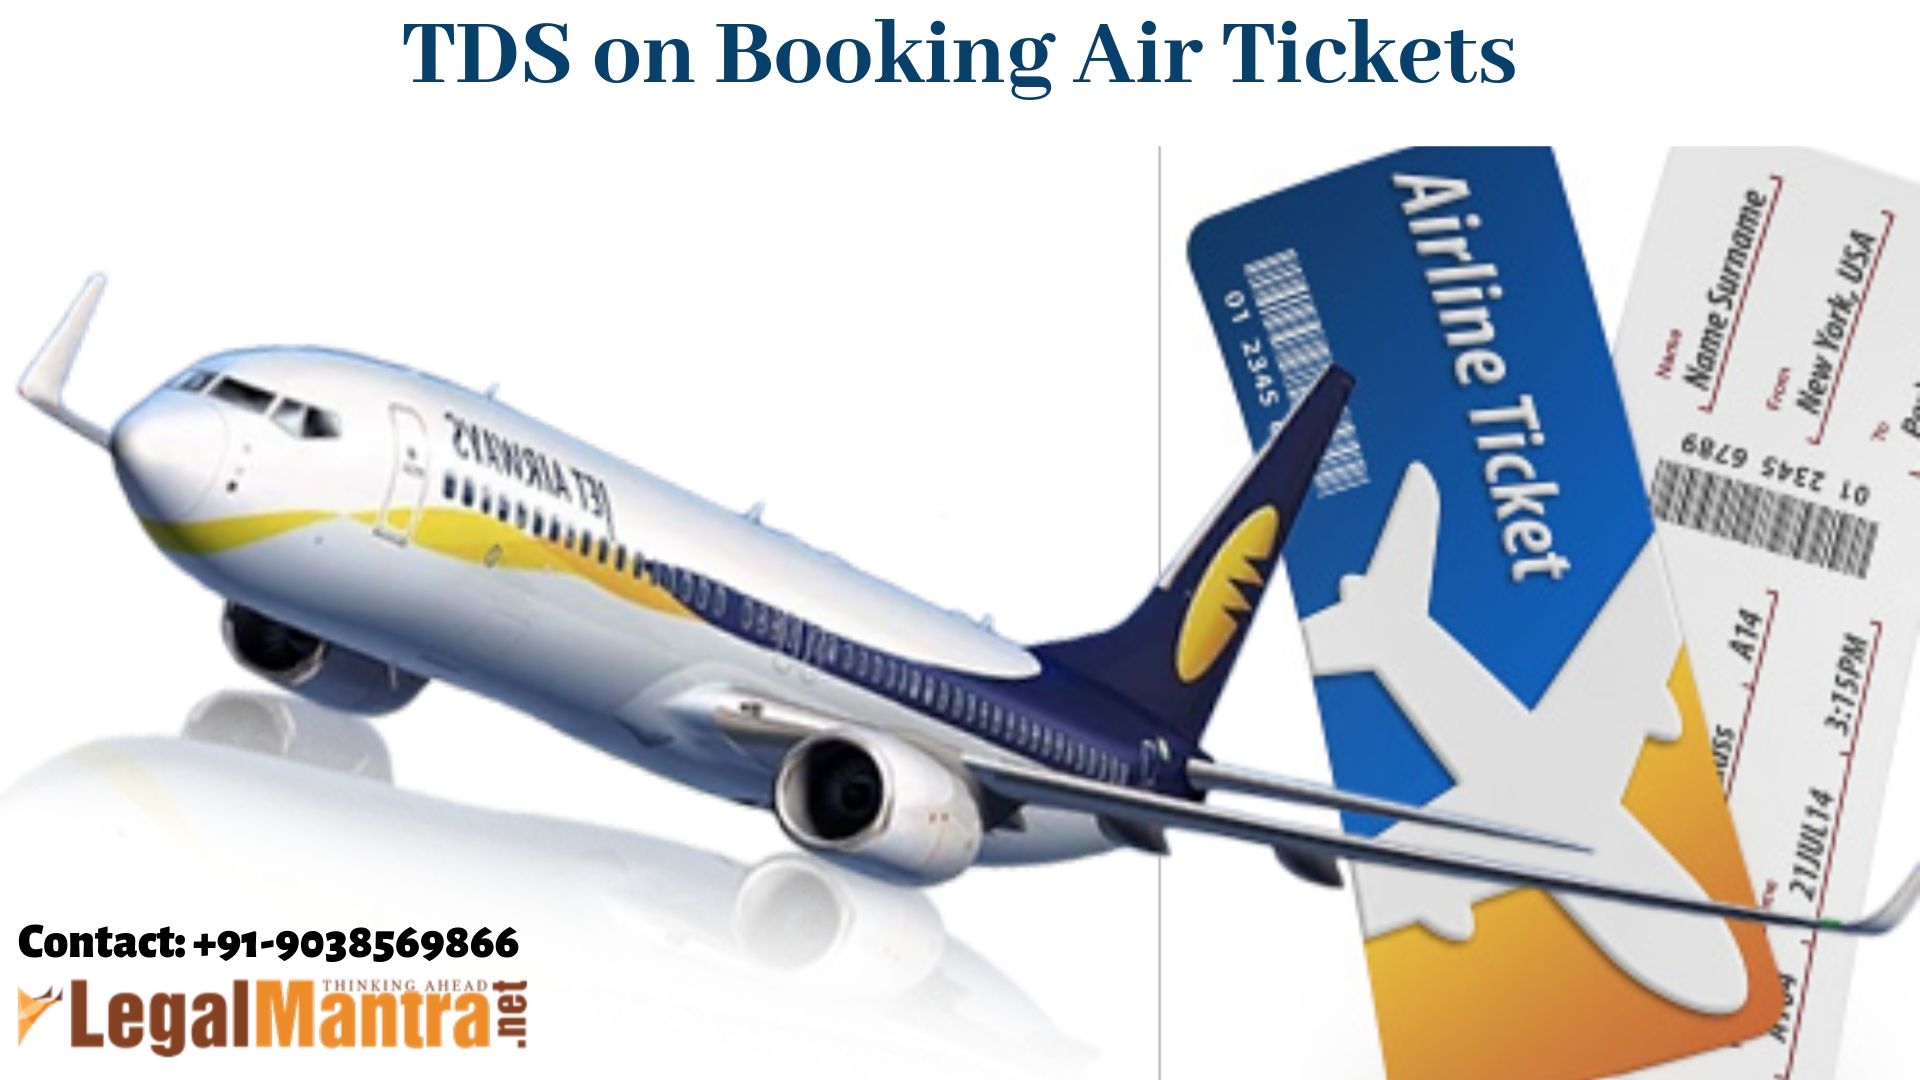 TDS on booking an air ticket